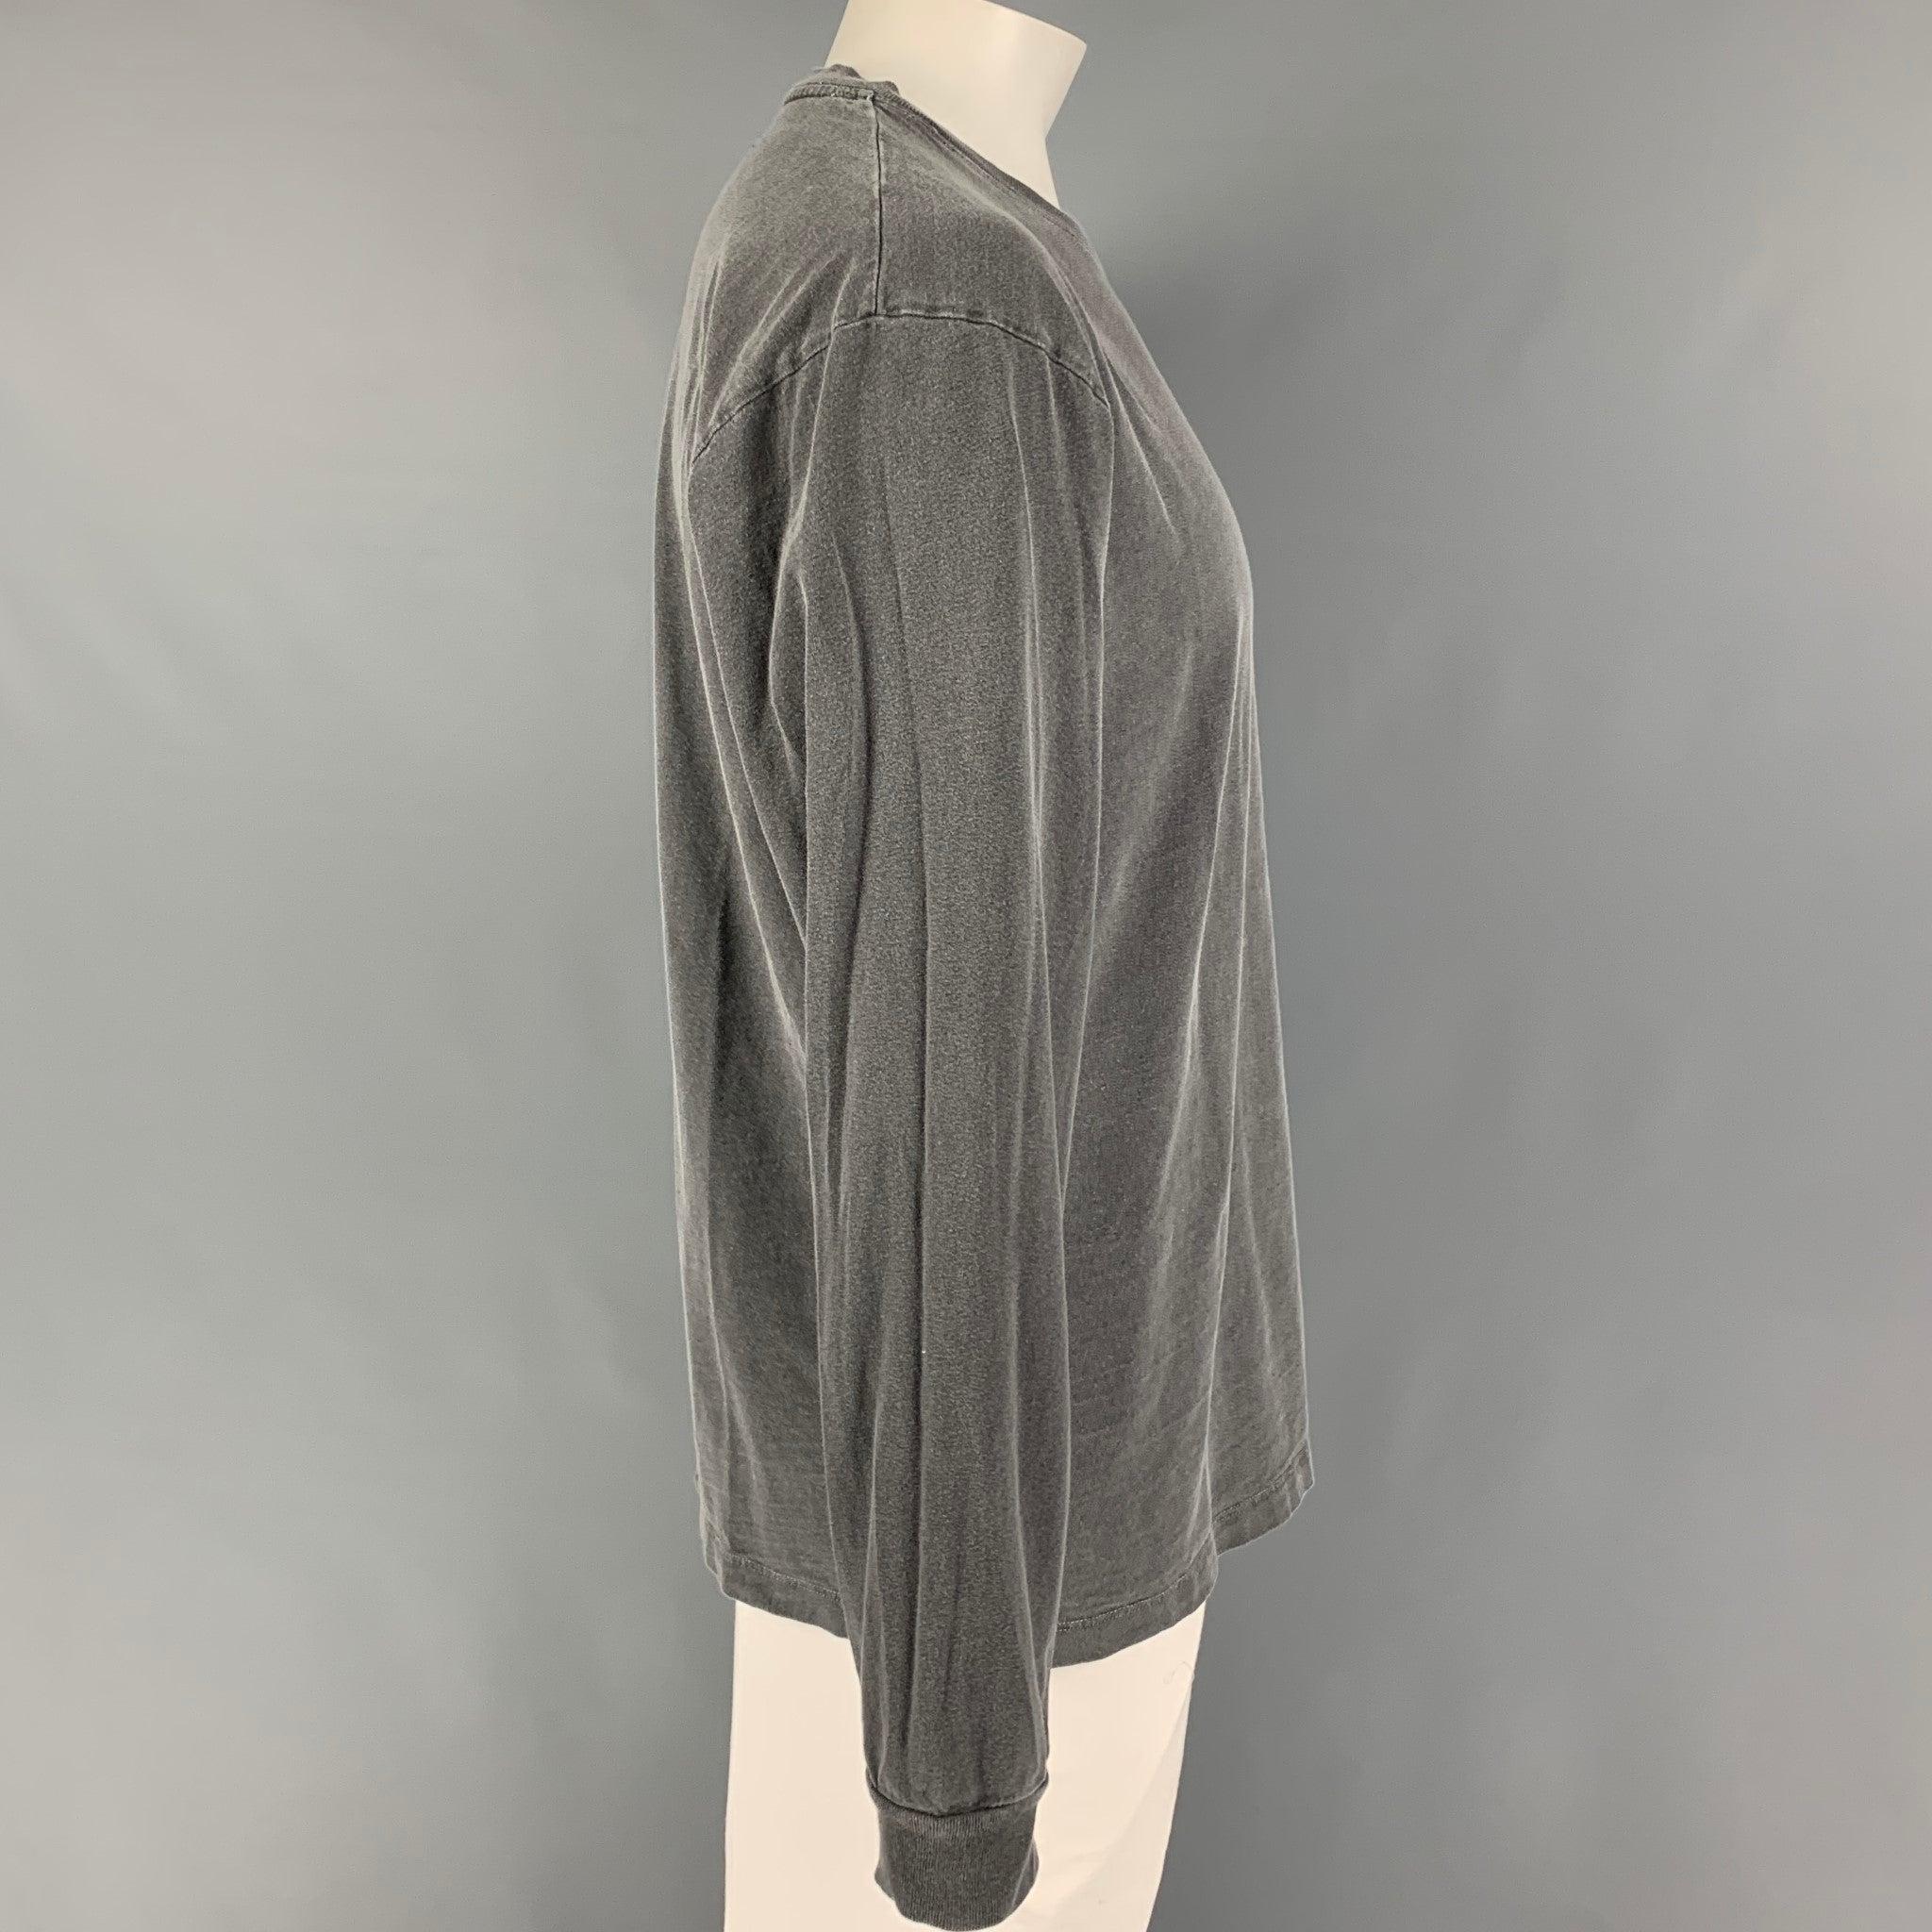 JOHN ELLIOTT t-shirt comes in a grey washed cotton featuring a crew-neck. Made in USA. Good
Pre-Owned Condition. Light wear. As-is.  

Marked:   3 

Measurements: 
 
Shoulder: 21 inches Chest: 42 inches Sleeve: 27 inches Length: 27.5 inches 
  
  
